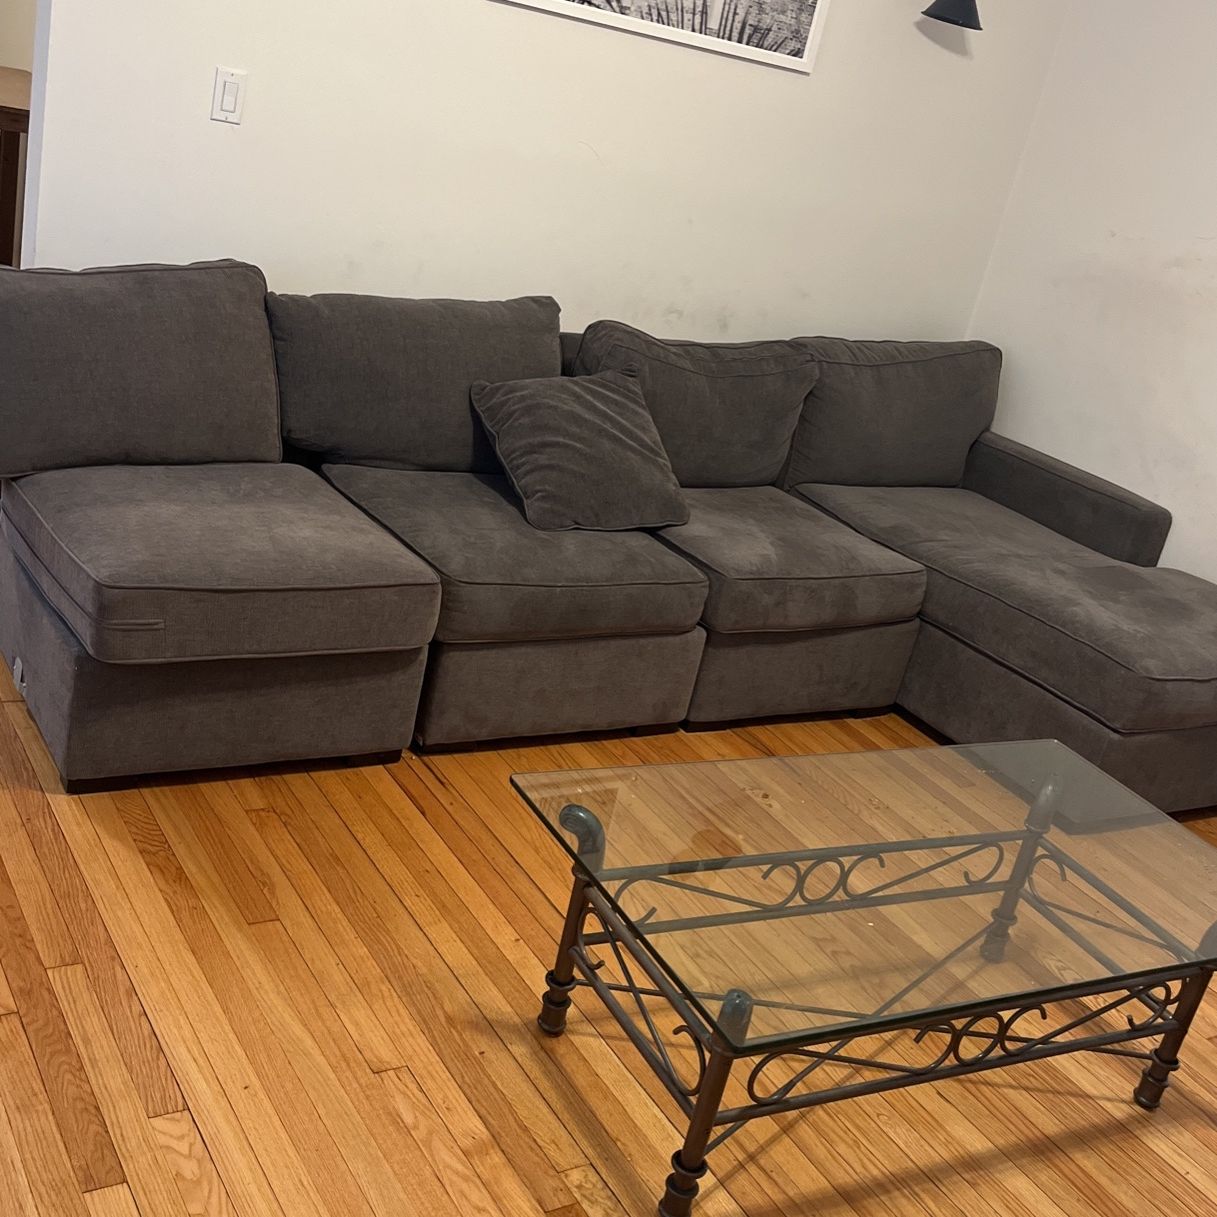 Couch $150 